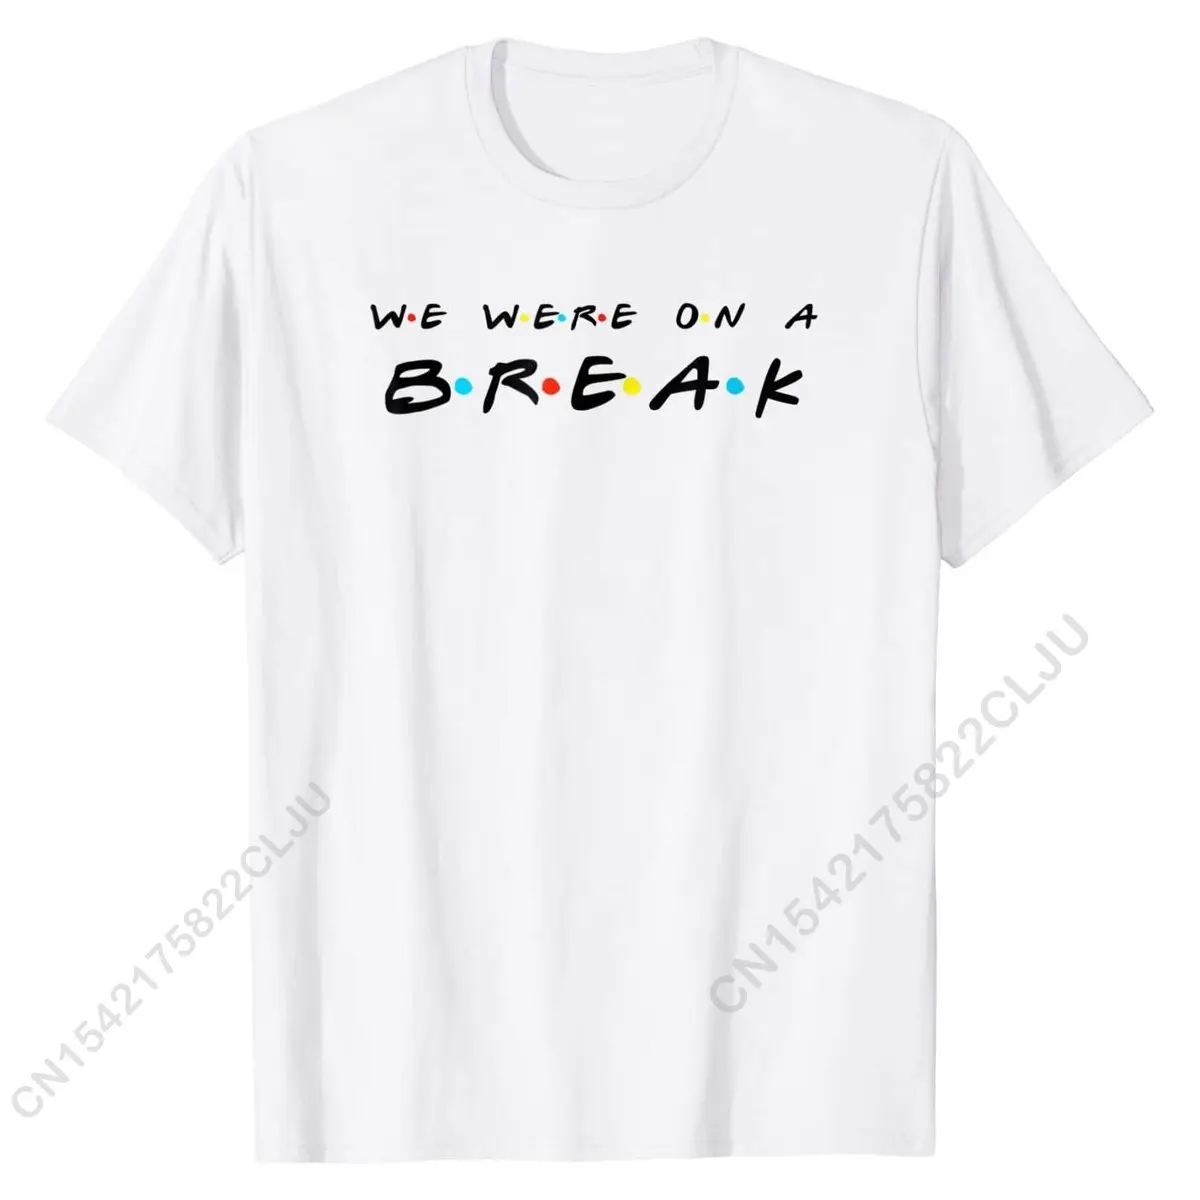 

We Were On A Break Funny T Shirt Slim Fit Top T-shirts Tops T Shirt For Men Cheap Cotton Casual Tshirts